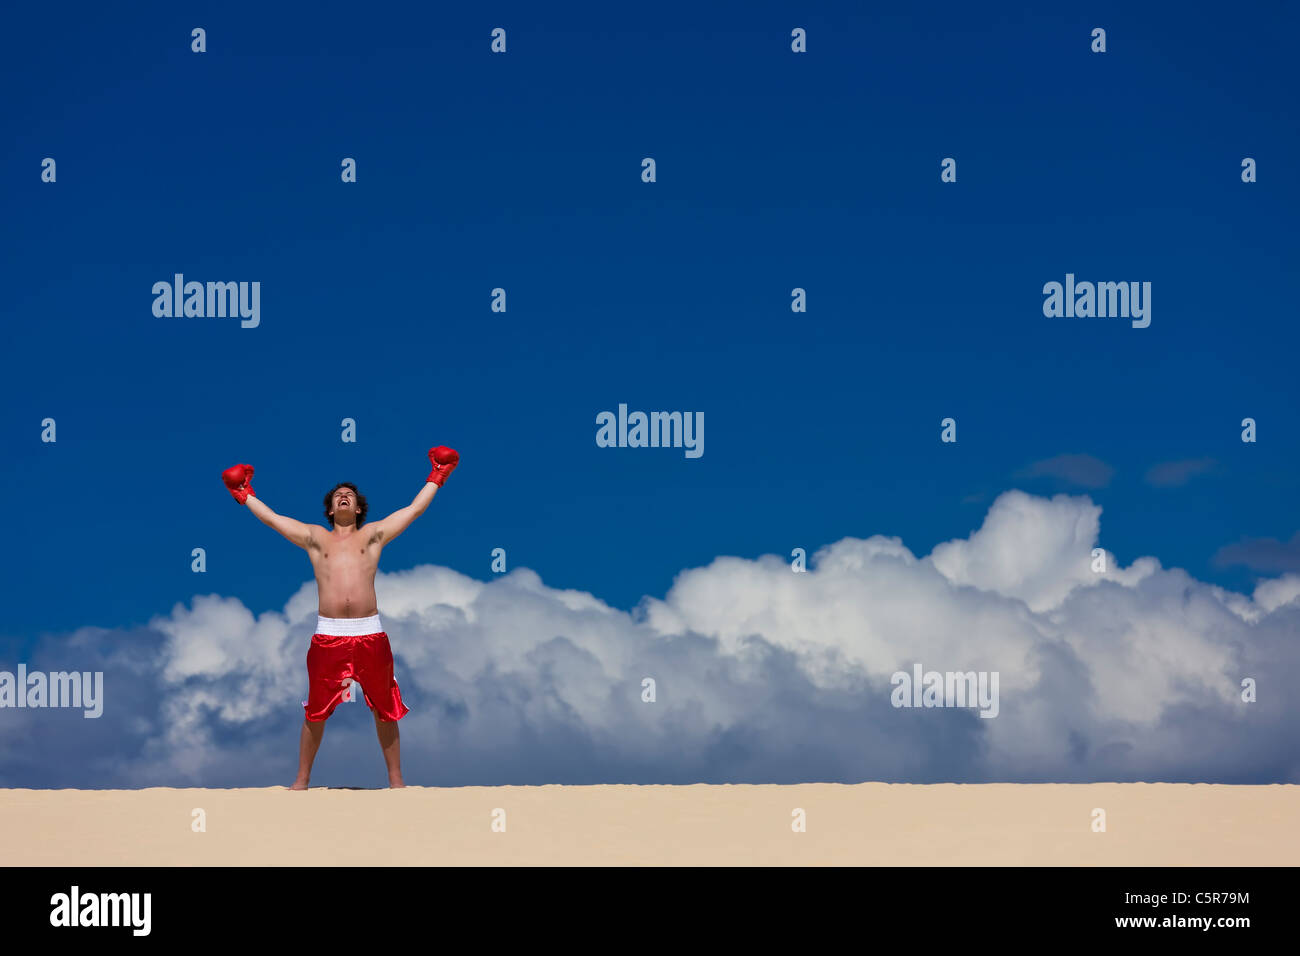 A Boxer celebrates being on top of the World. Stock Photo